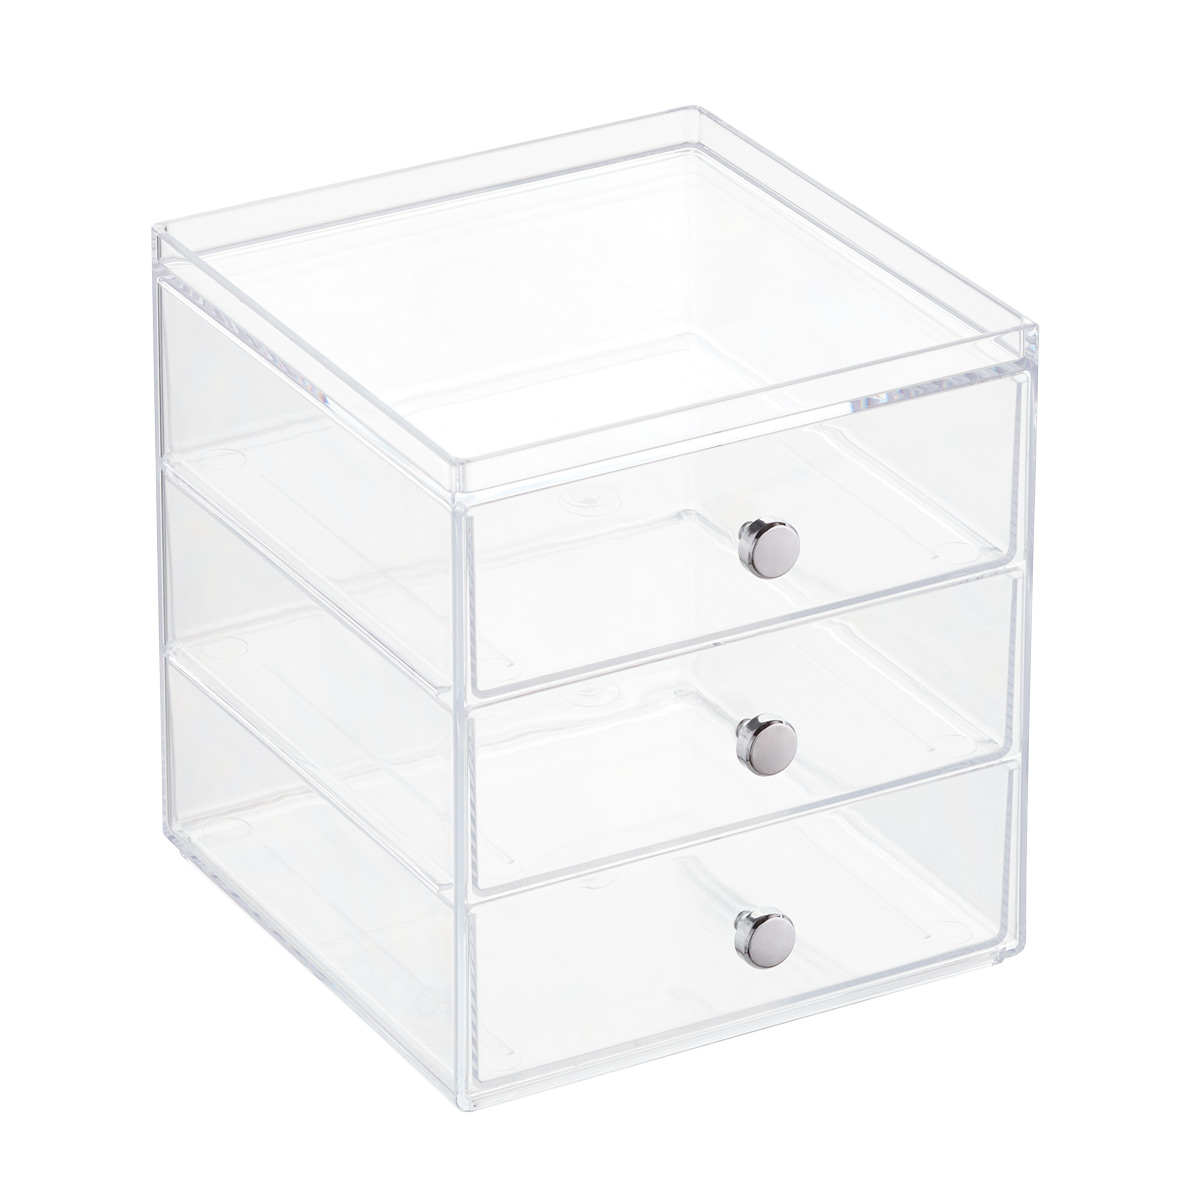 https://www.containerstore.com/catalogimages/336357/10064432-clarity-3-drawer-stacking-b.jpg